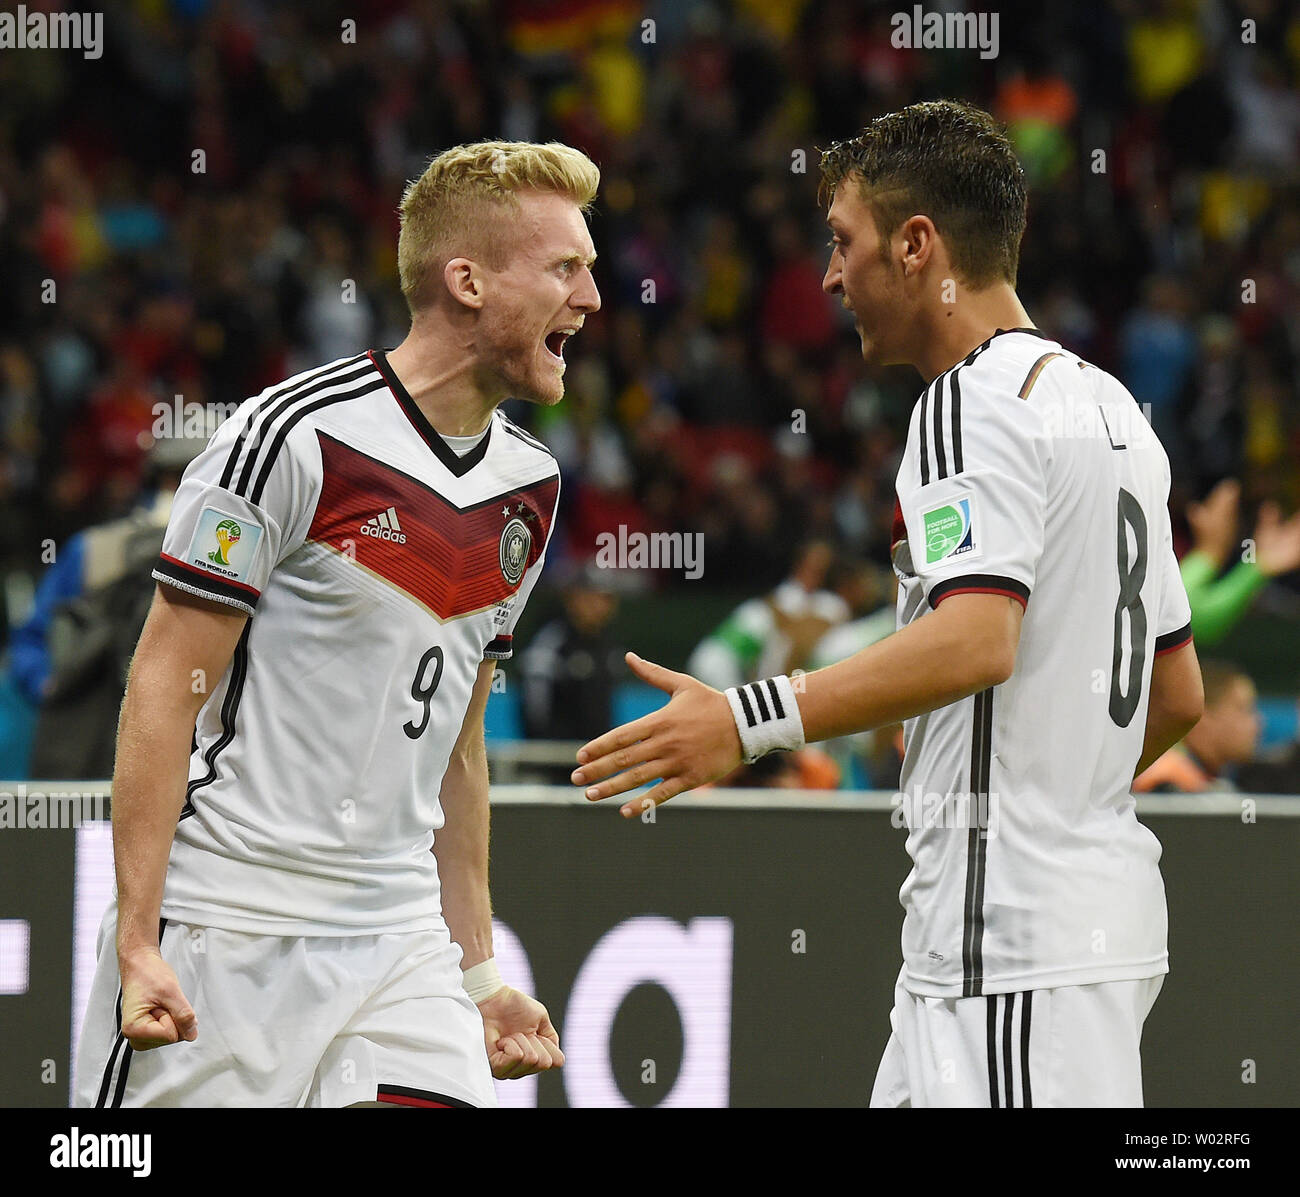 Andre Schurrle (L) of Germany celebrates scoring the opening goal with team-mate Mesut Ozil during the 2014 FIFA World Cup Round of 16 match at the Estadio Beira-Rio in Porto Alegre, Brazil on June 30, 2014. UPI/Chris Brunskill Stock Photo